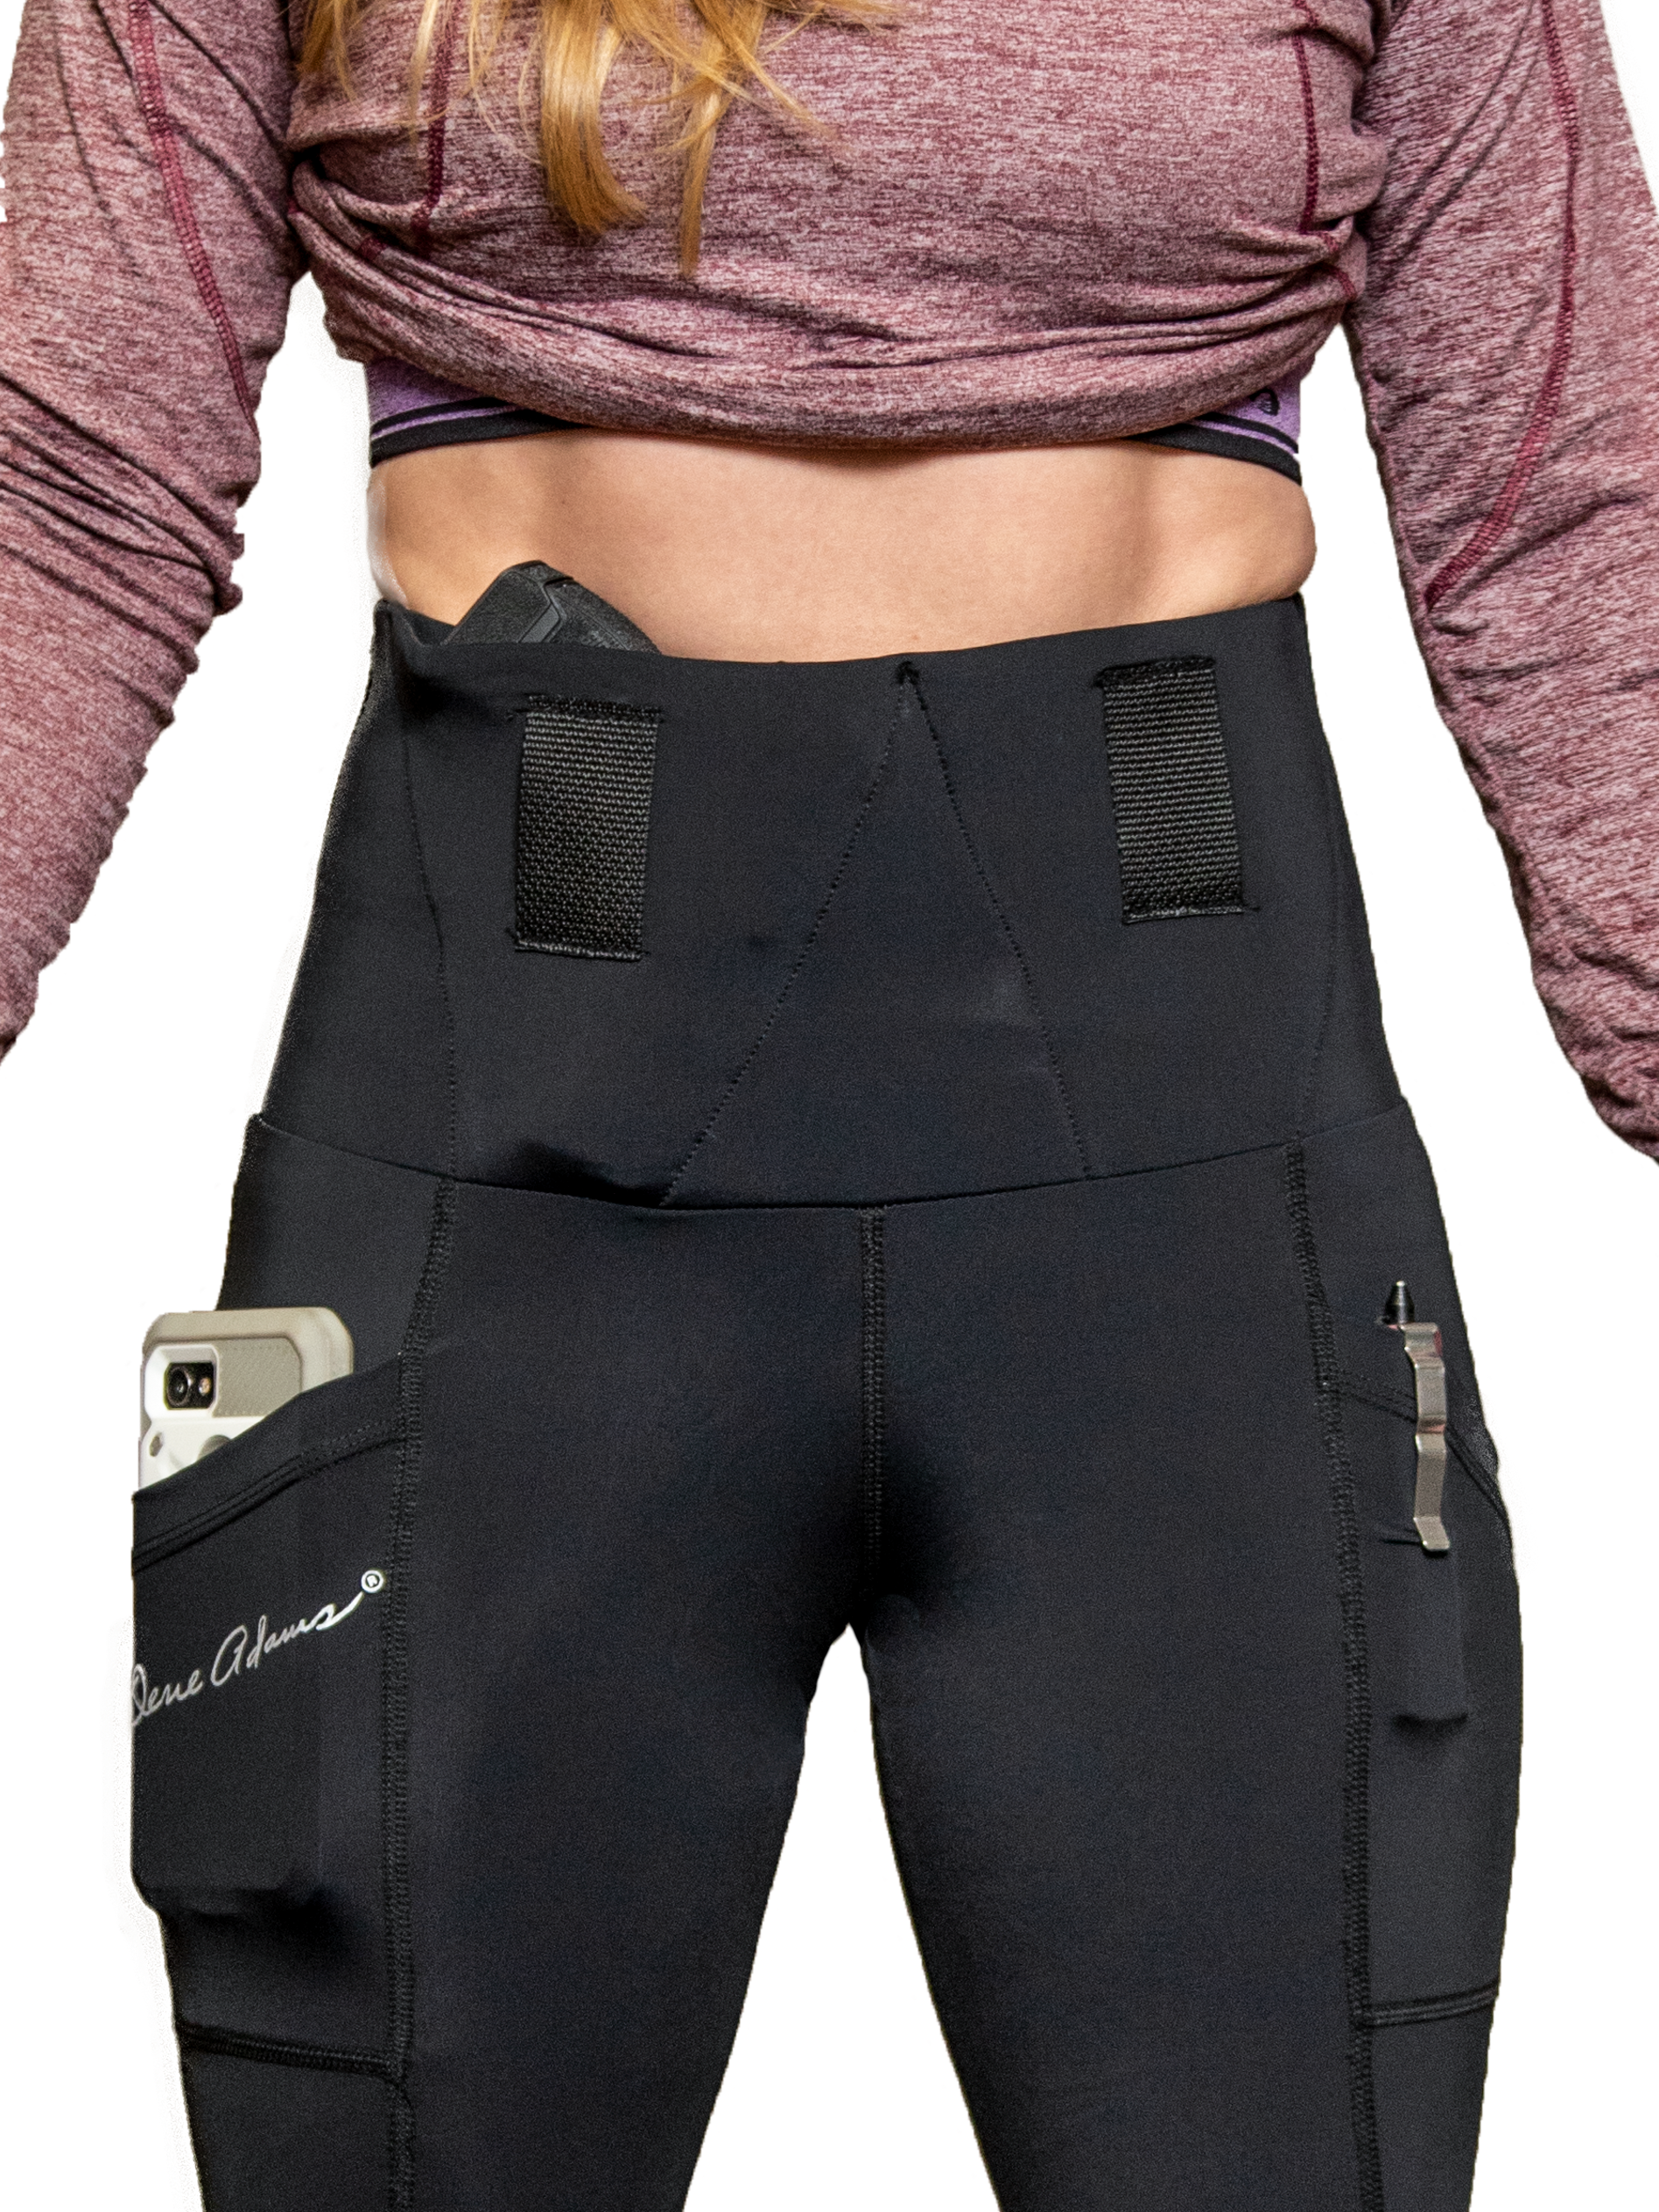 Cropped Leggings  Concealed Carry Clothing